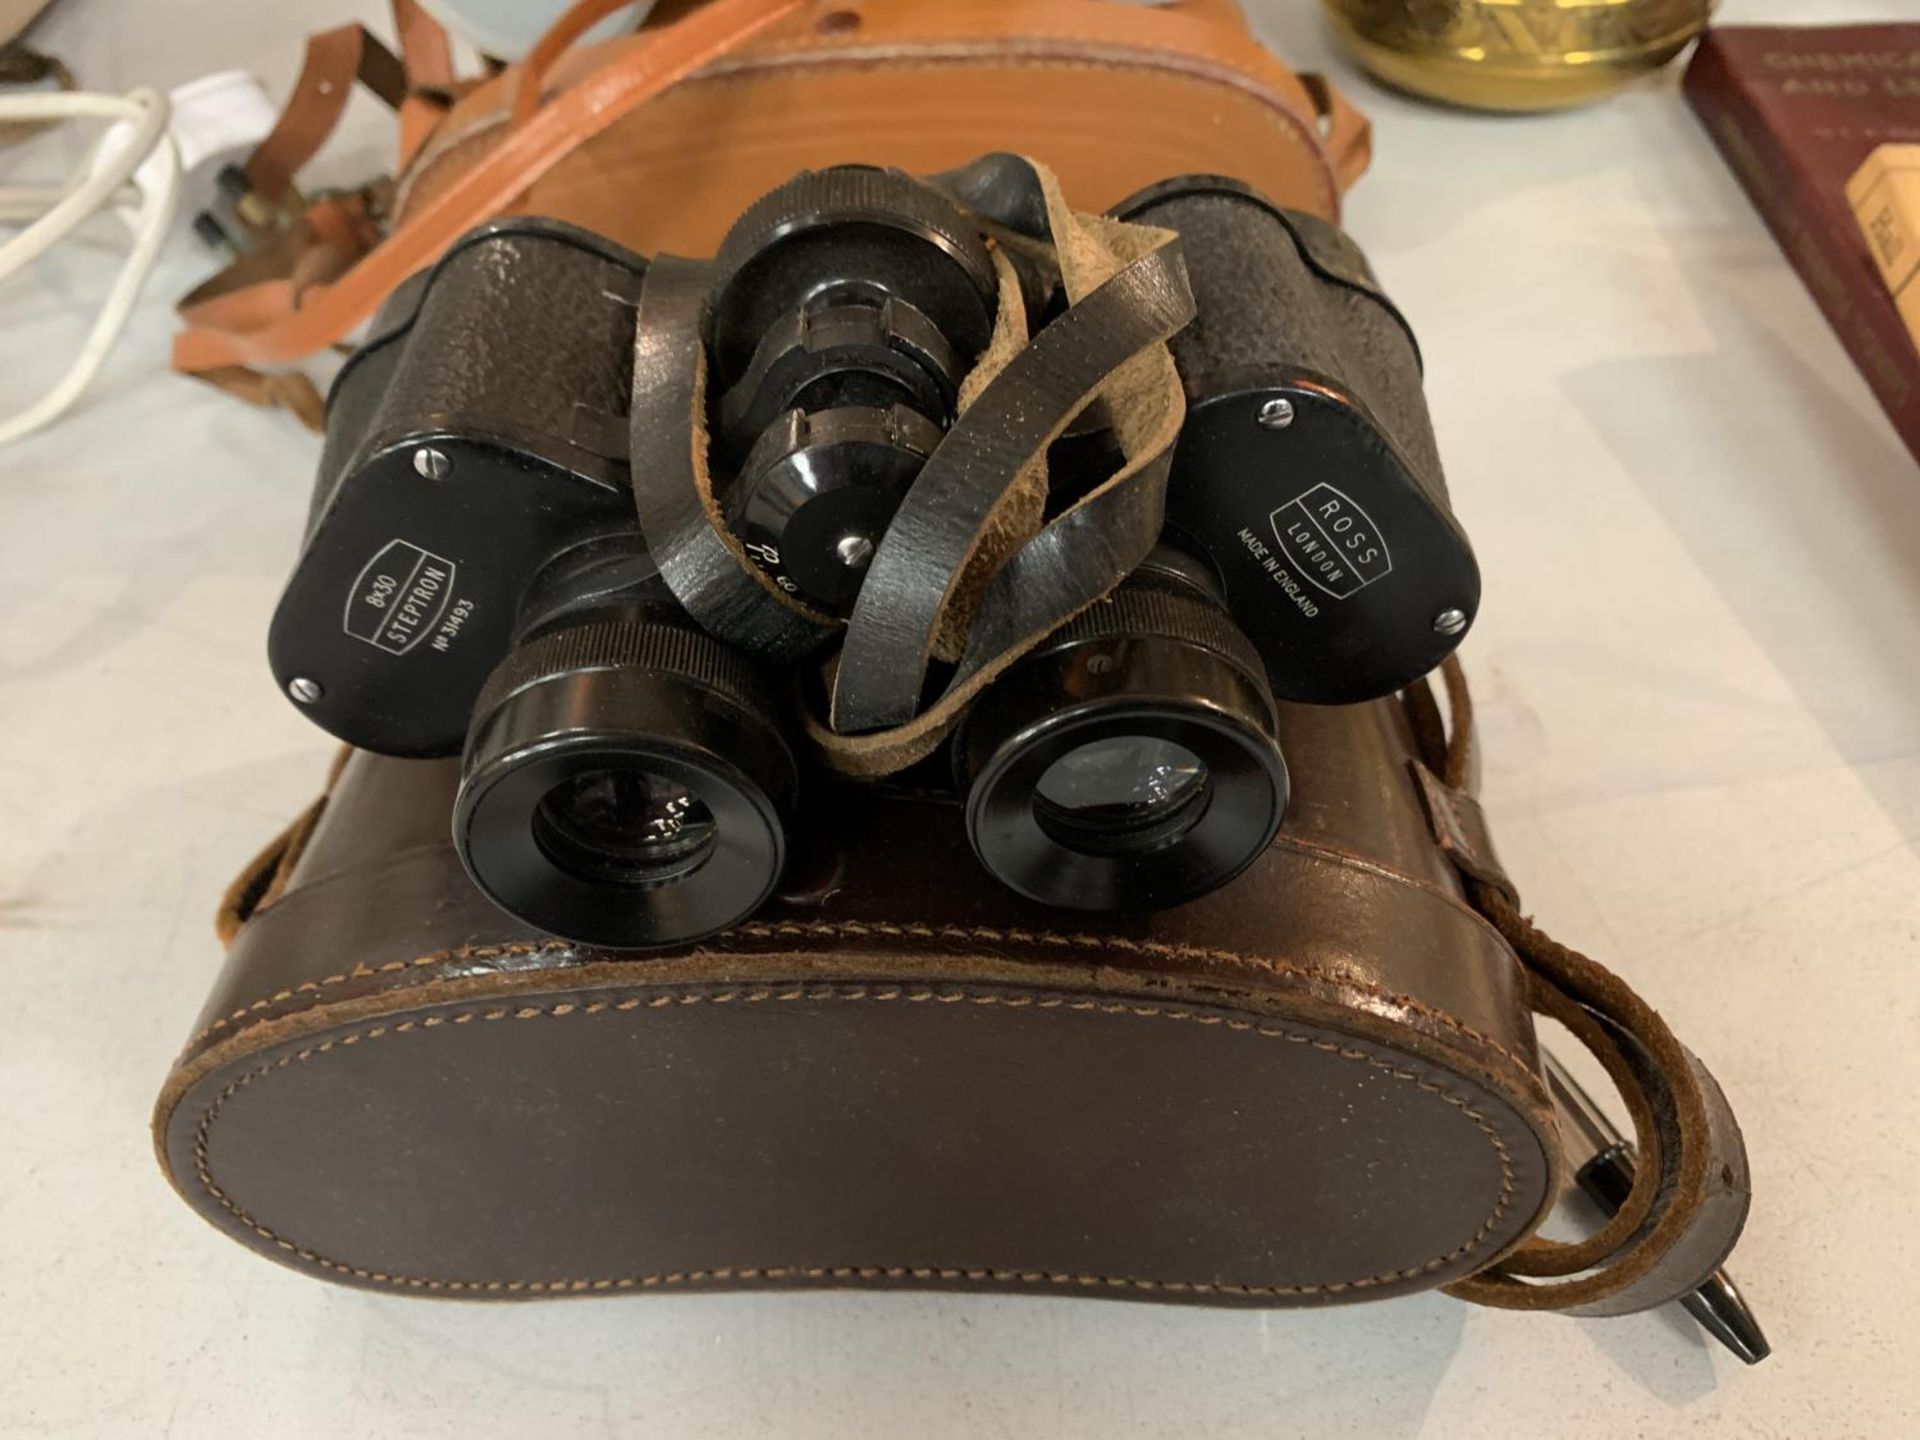 TWO PAIRS OF BINOCULARS WITH CASES - Image 2 of 3